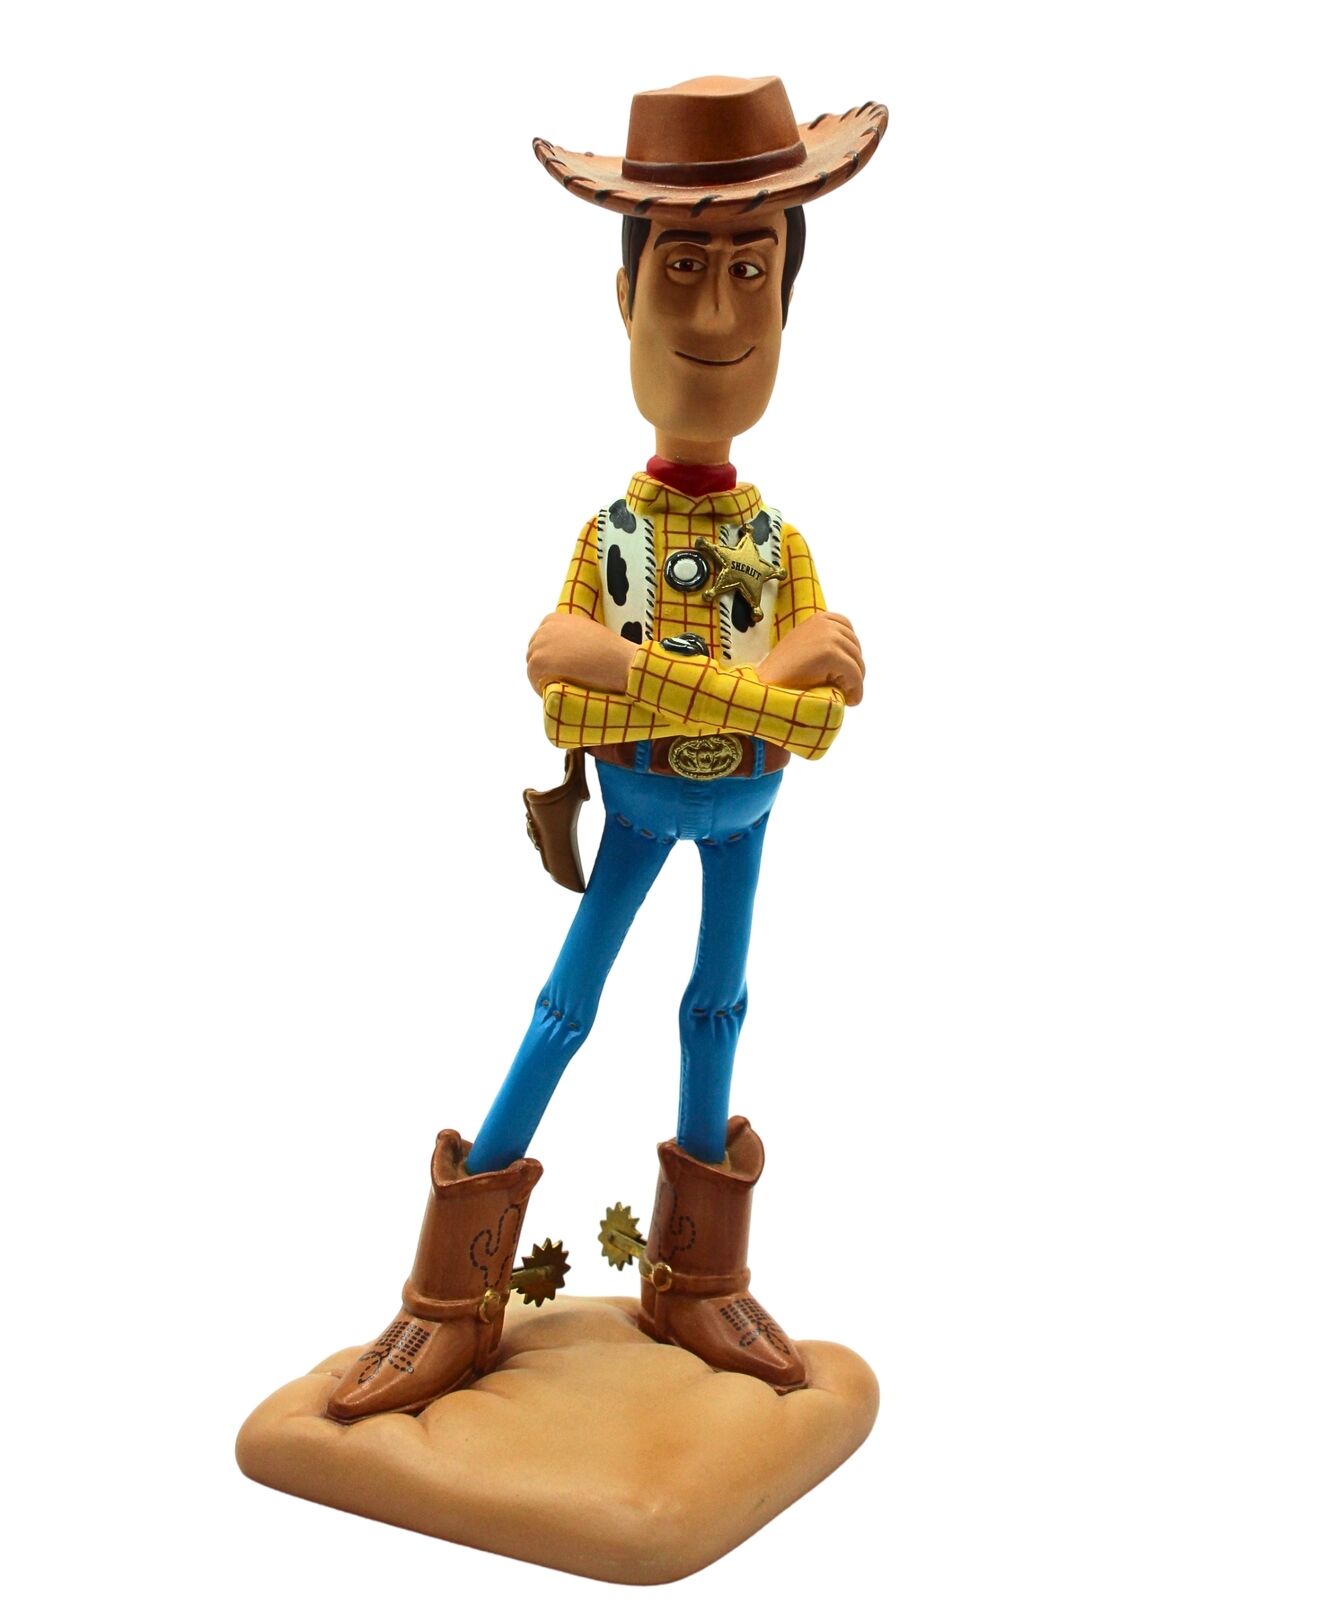 WDCC Woody - I'm Still Andy's Favorite Toy | 10288763 | Toy Story | Please Read